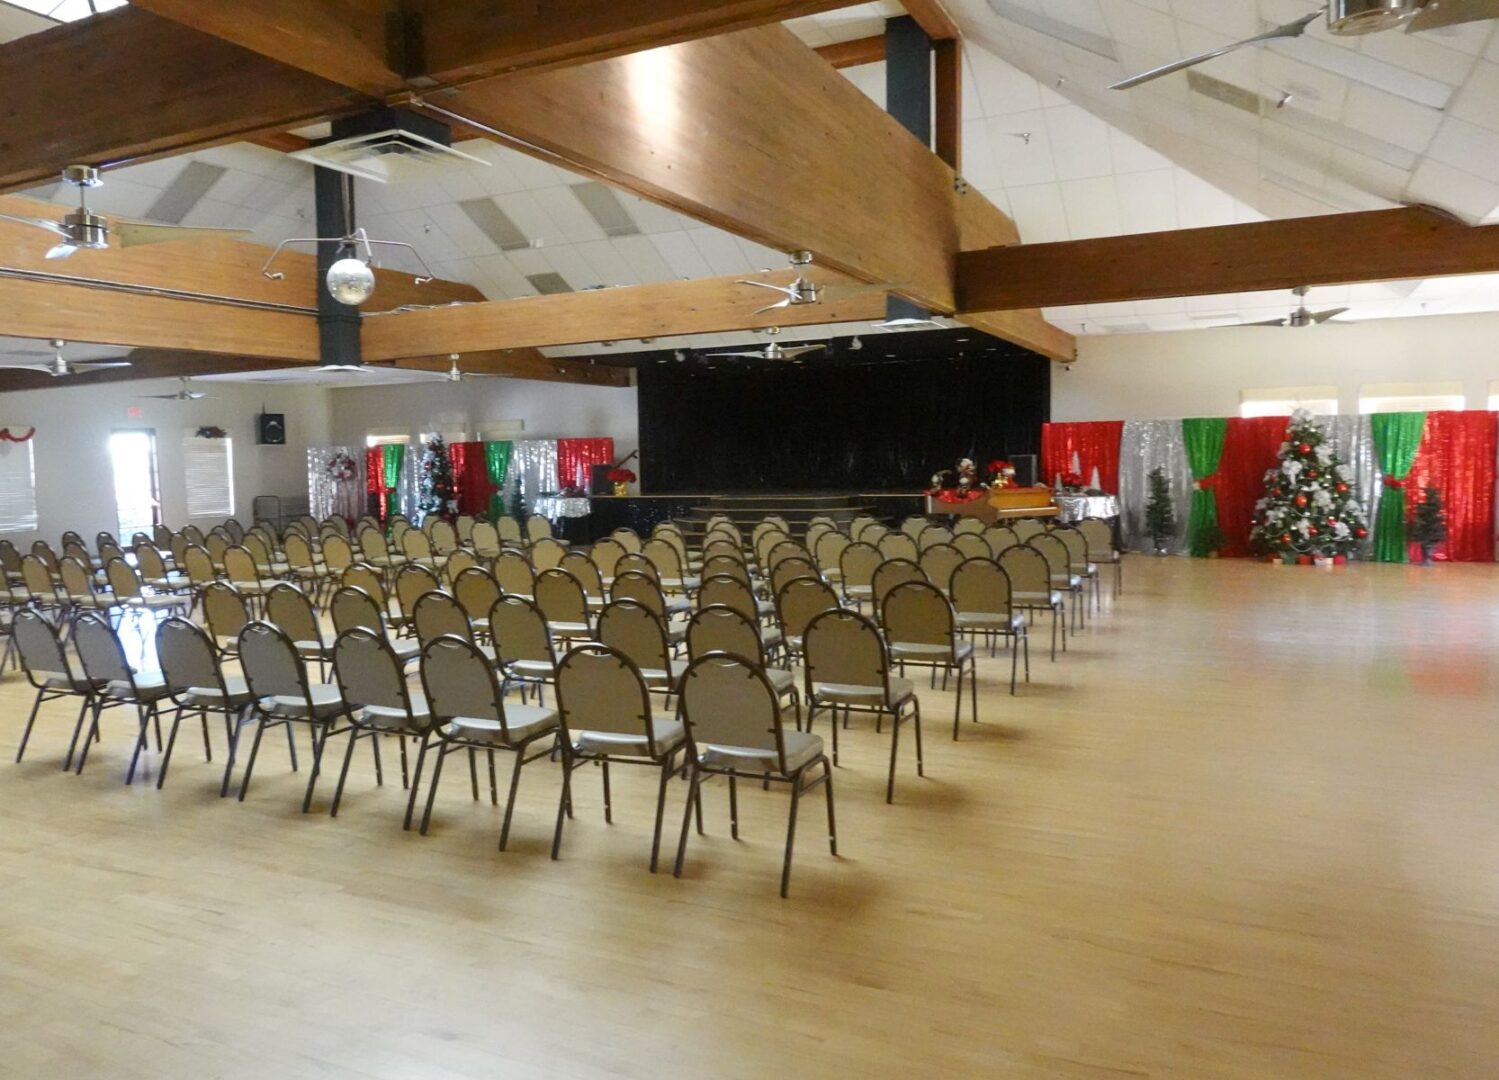 A large room filled with chairs and a christmas tree.